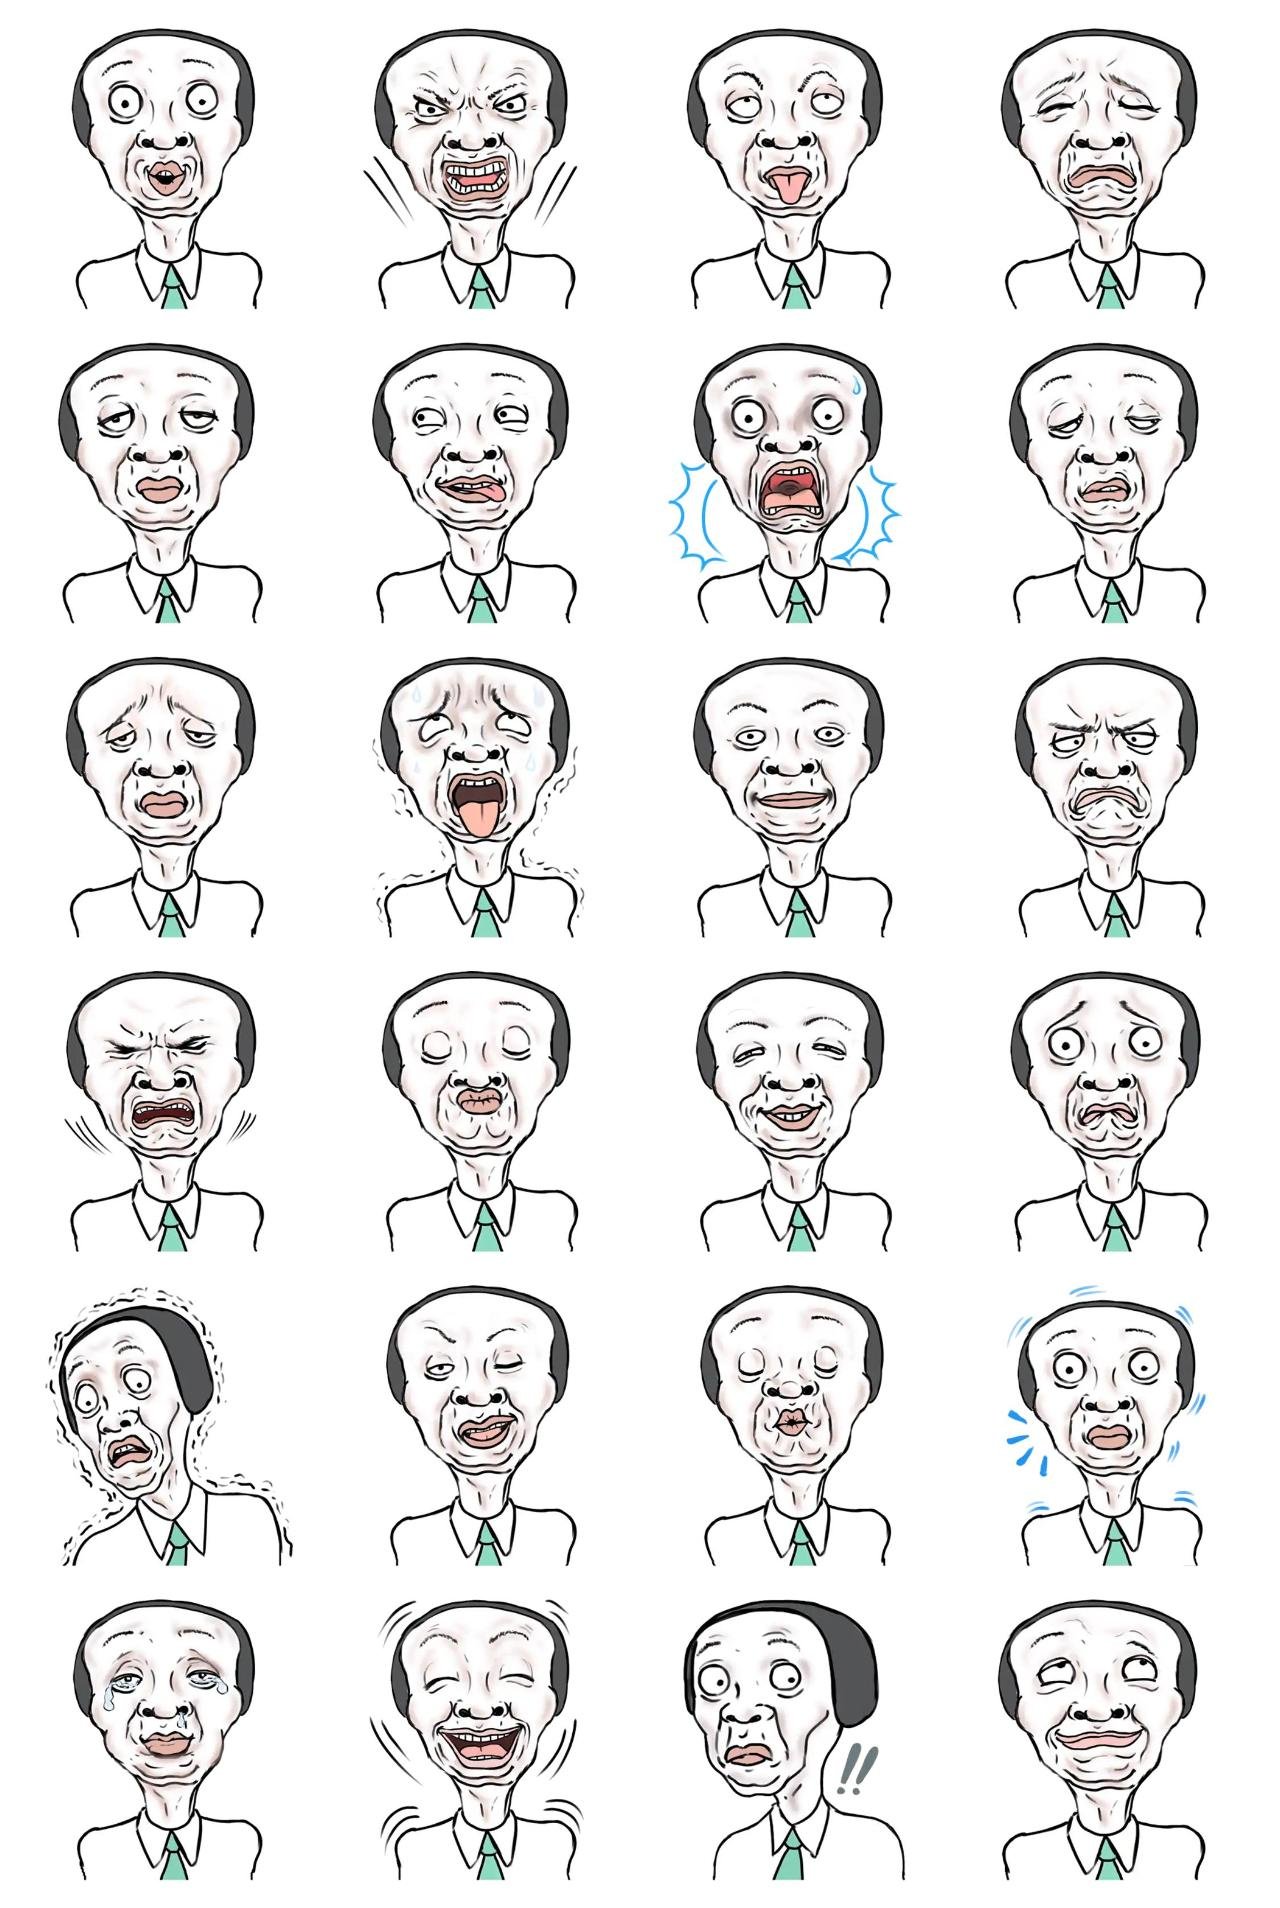 Mr Bong People sticker pack for Whatsapp, Telegram, Signal, and others chatting and message apps